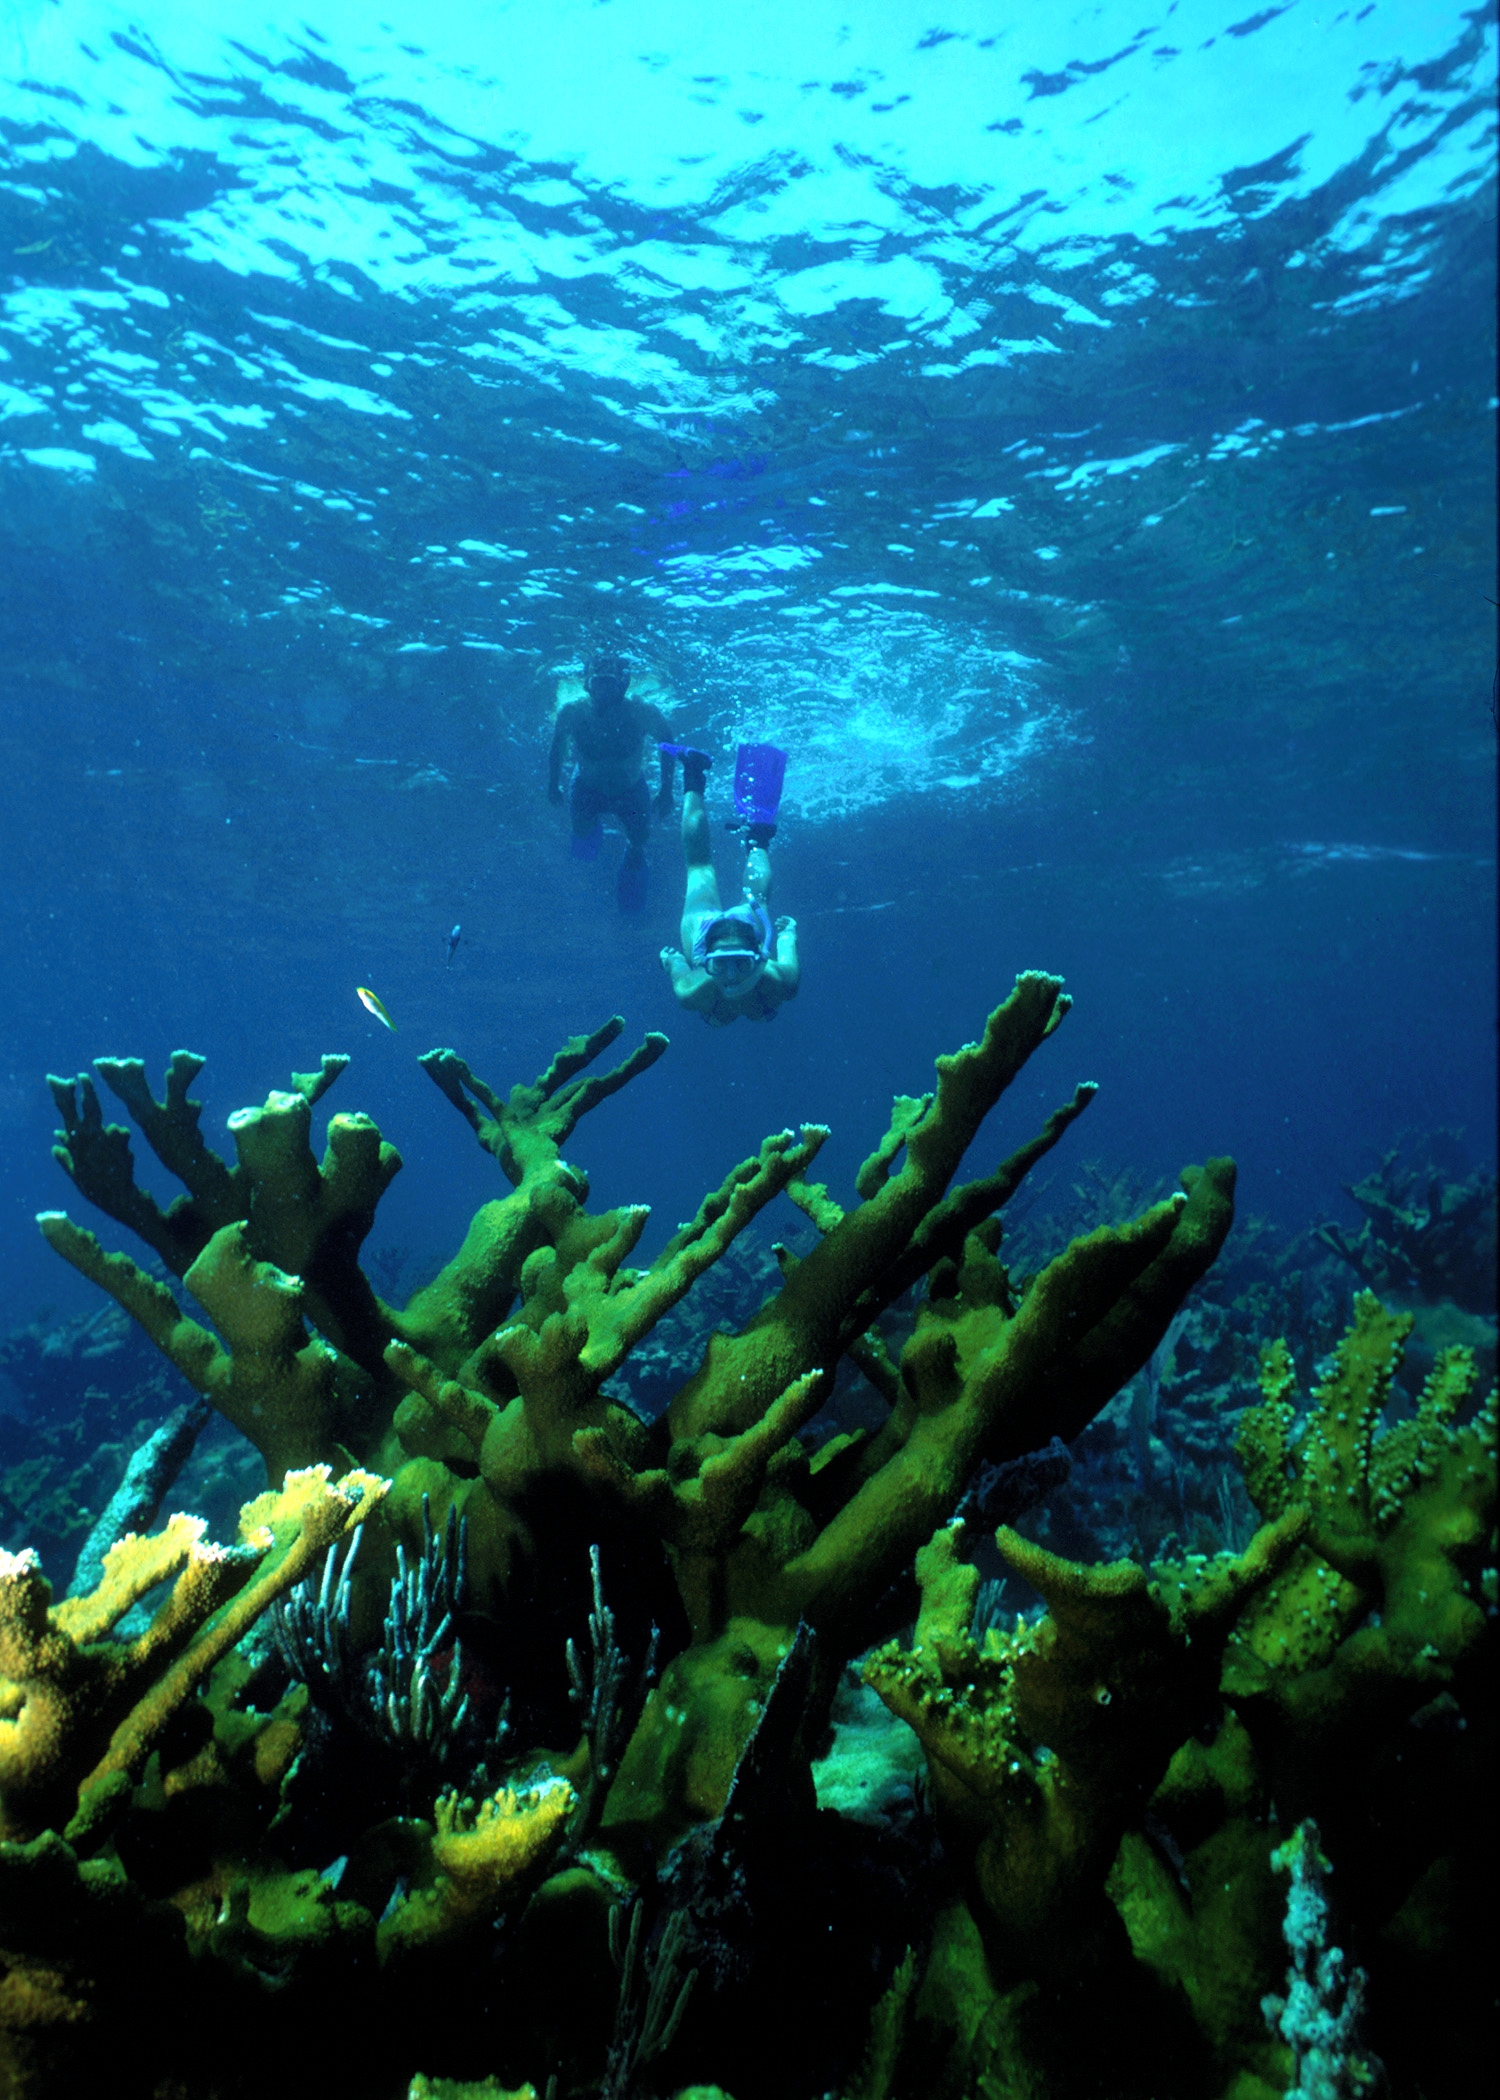 Coral reef with two snorkelers diving below the surface